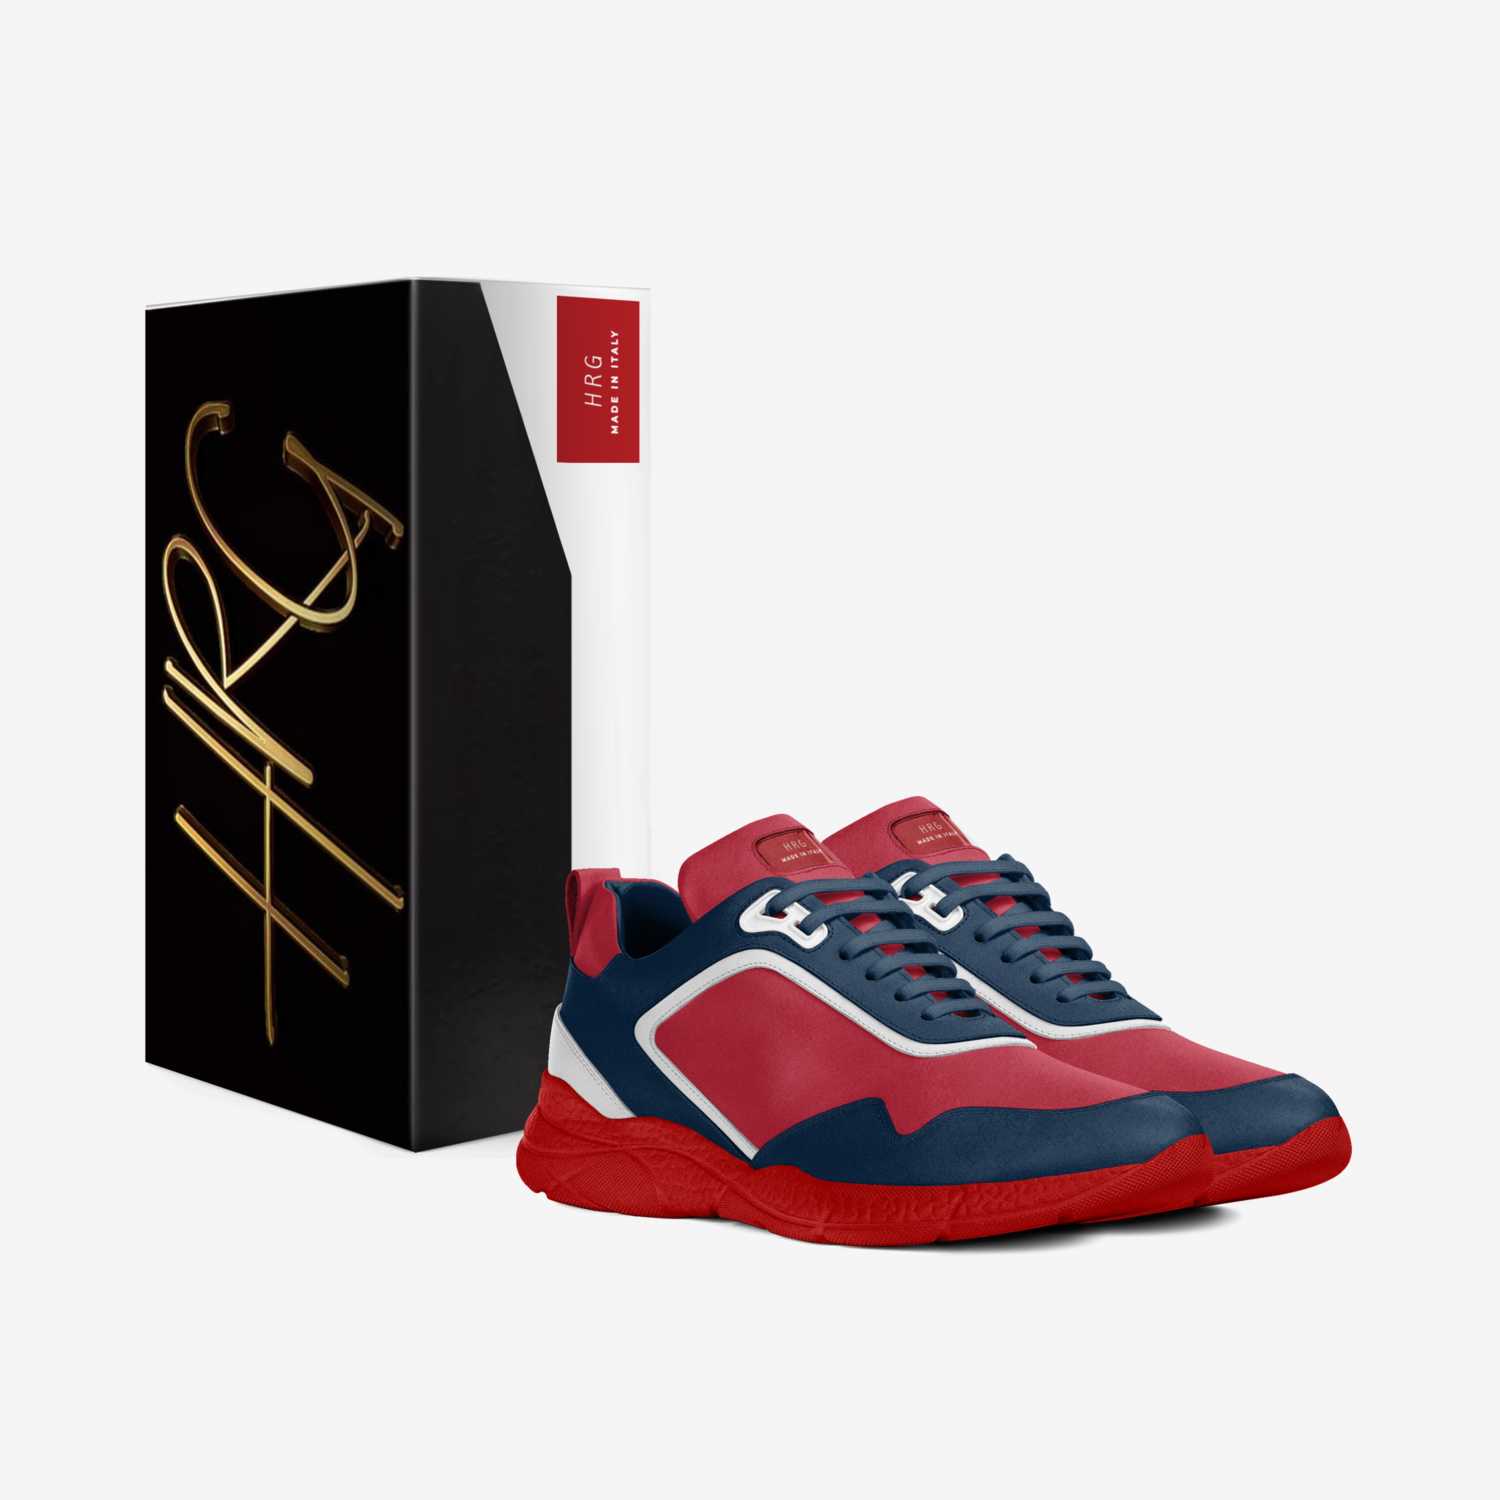 Great Runs custom made in Italy shoes by Harold Gray | Box view